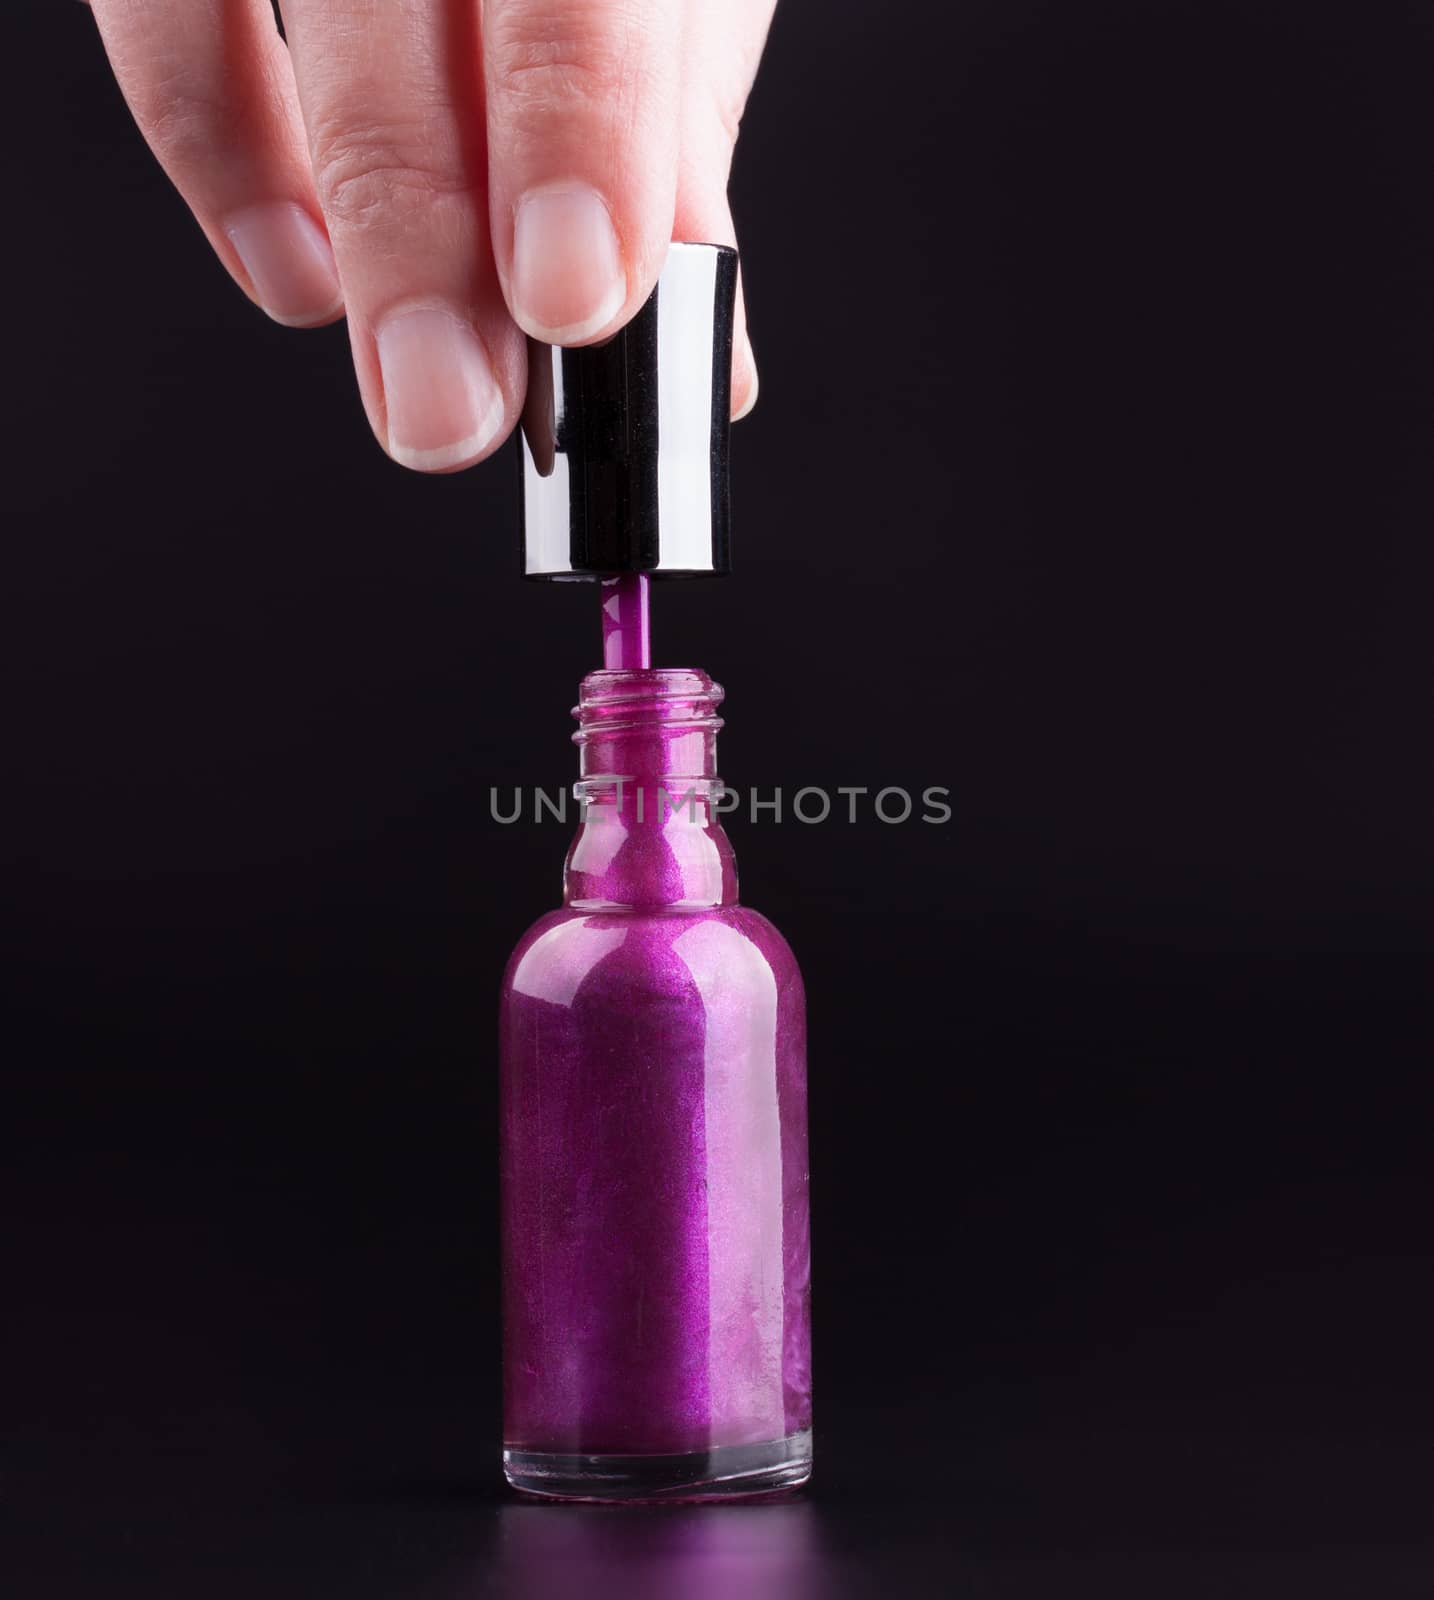 Bottle of purple nail polish by lanalanglois